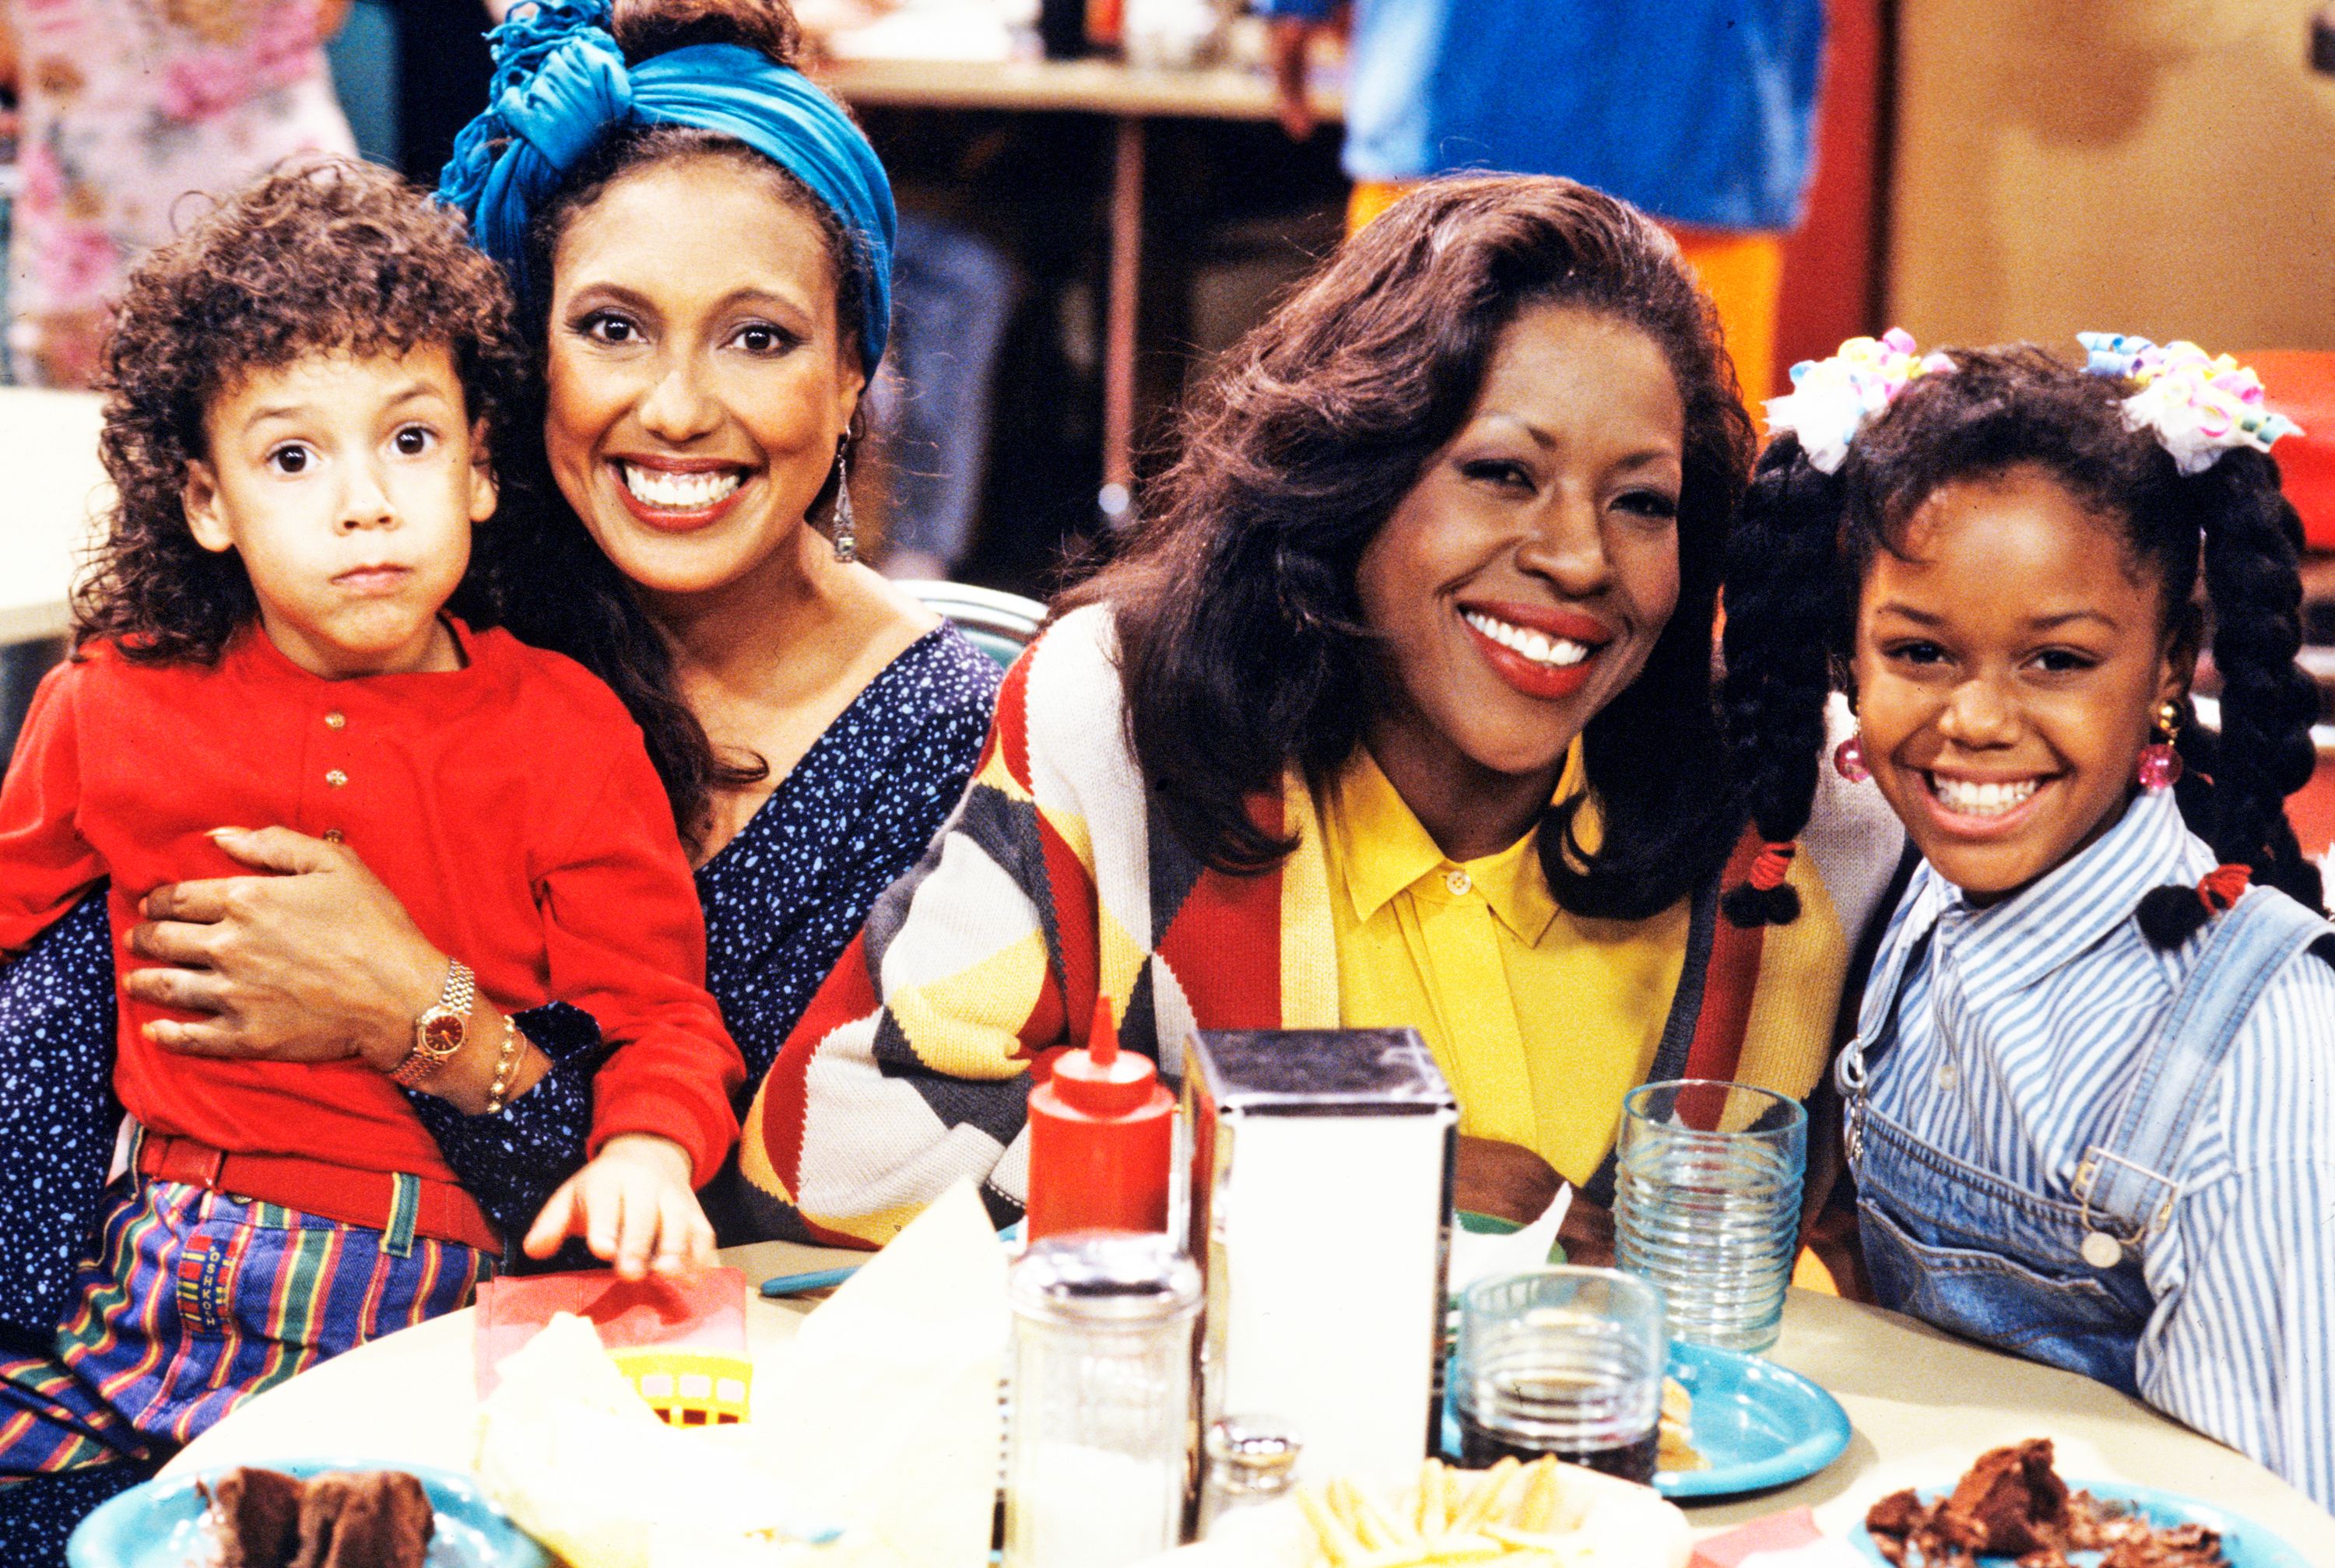 Bryton James, Telma Hopkins, Jo Marie Payton, and Jaimee Foxworth on the set of "Family Matters" in 1991 | Source: Getty Images